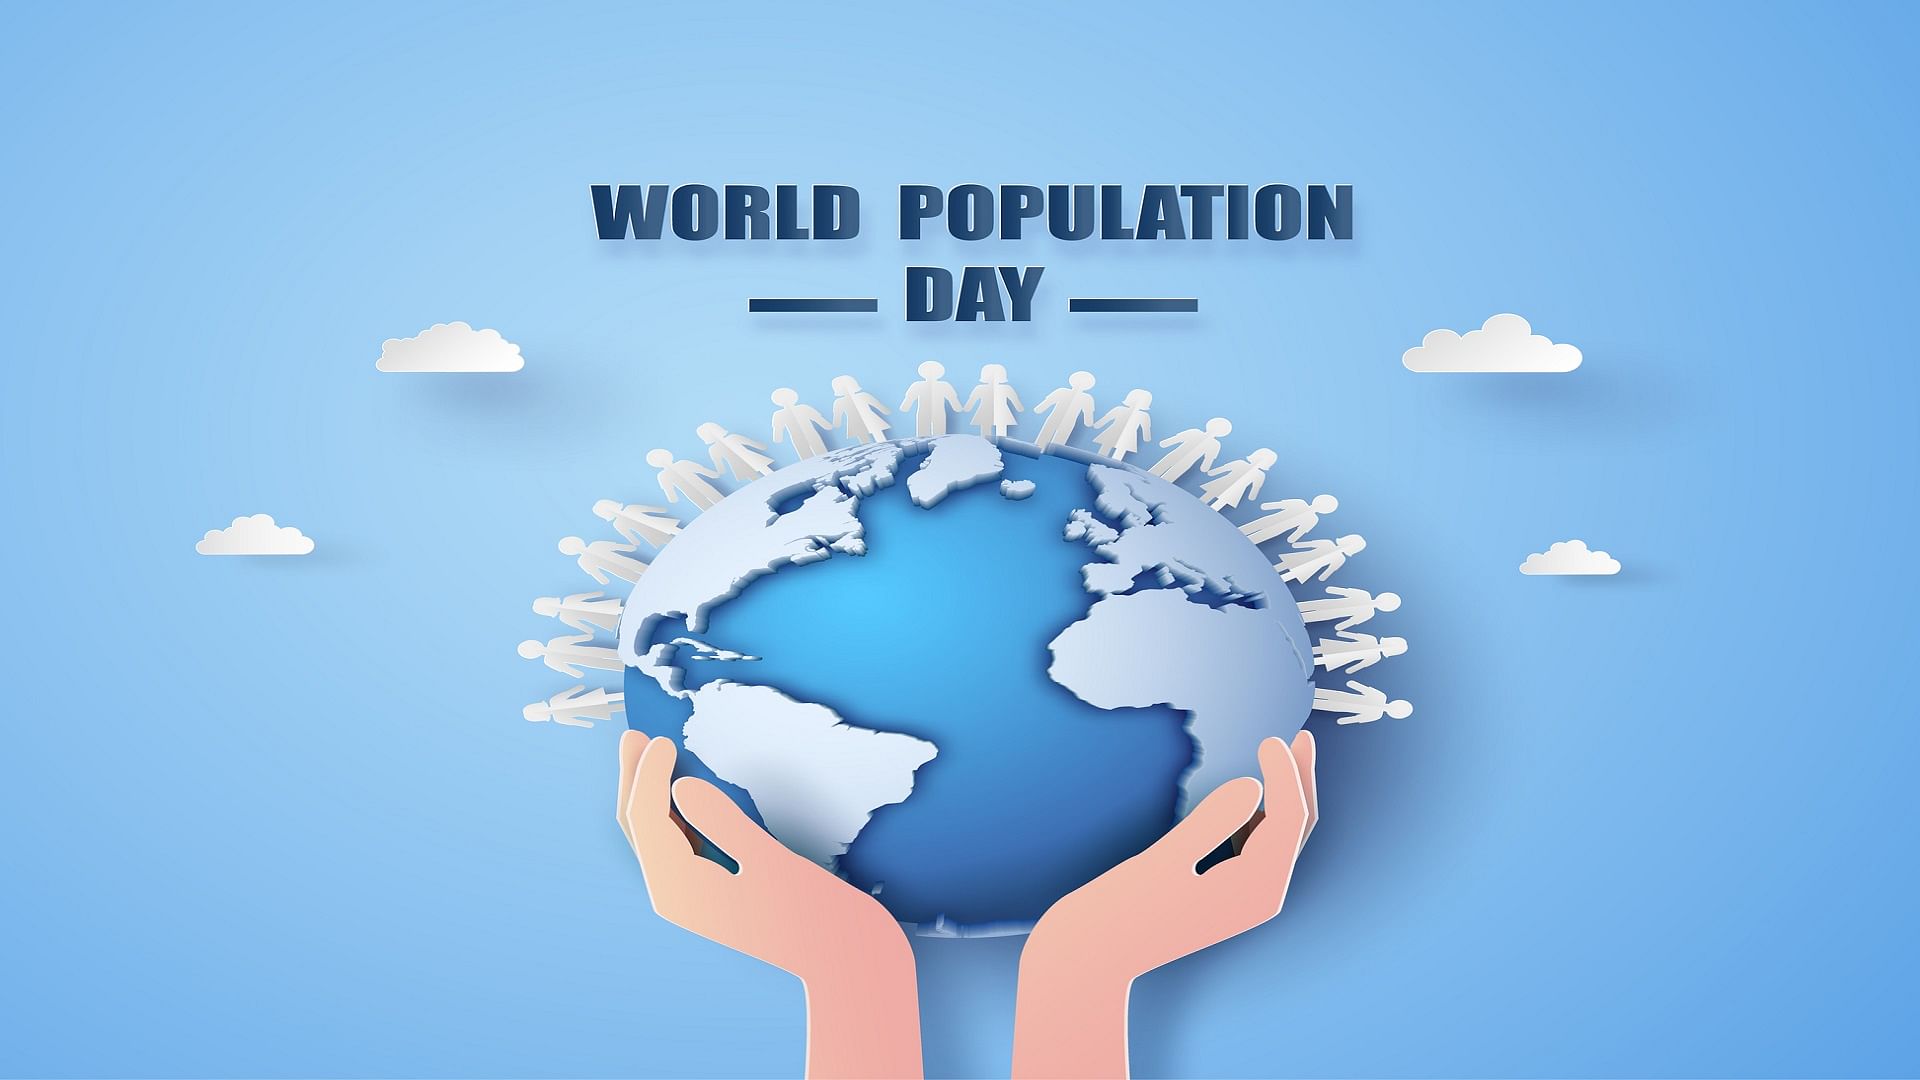 World Population Day Stock Photos and Images - 123RF